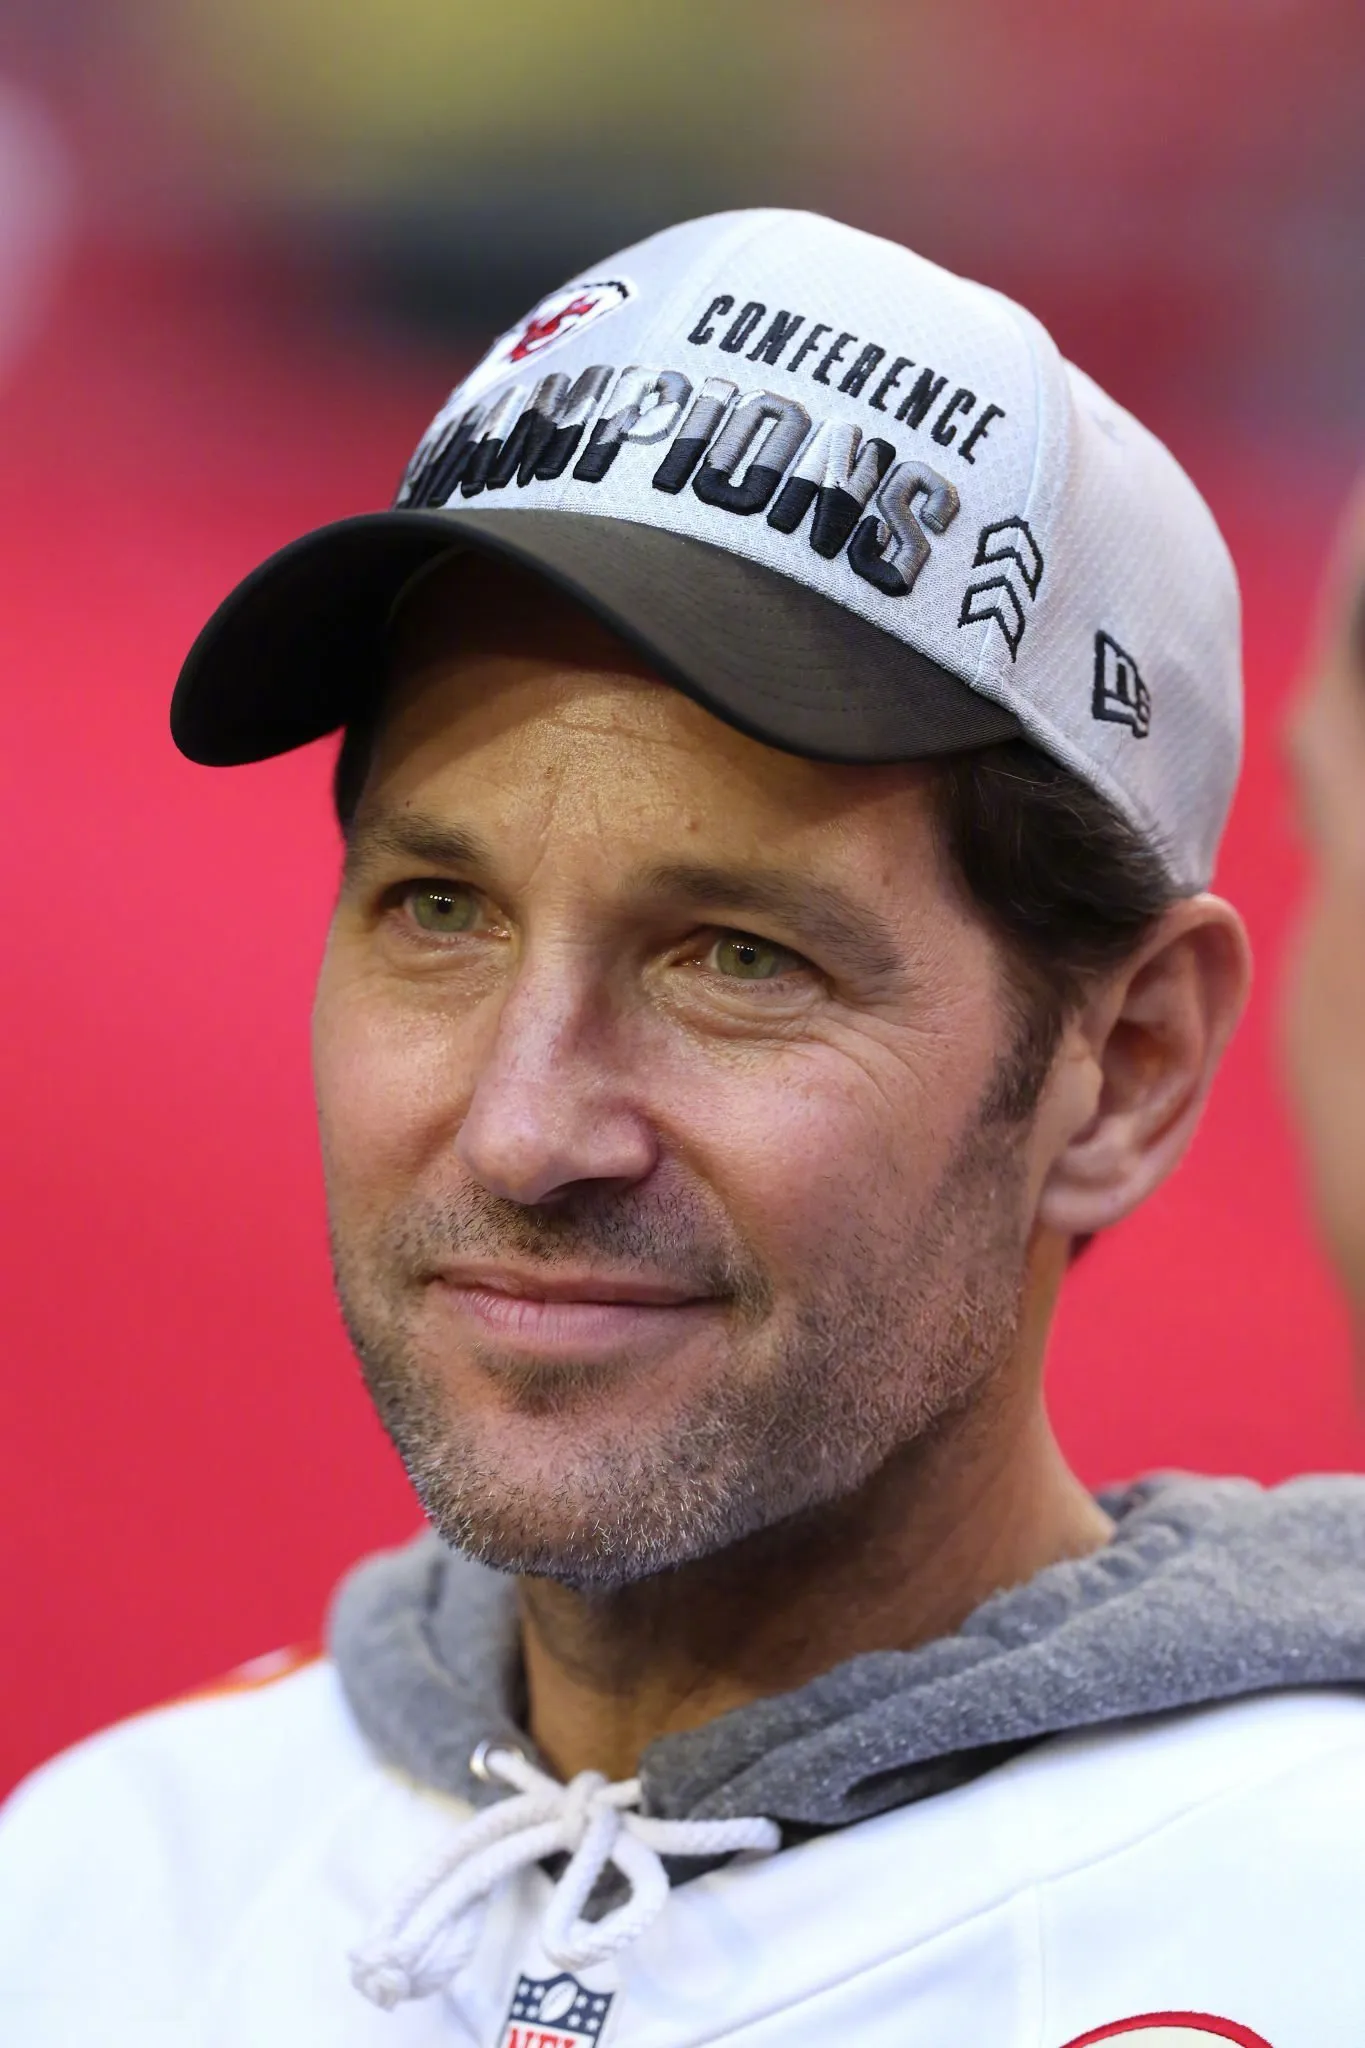 Paul Rudd Watches Super Bowl With His Son | FMV6